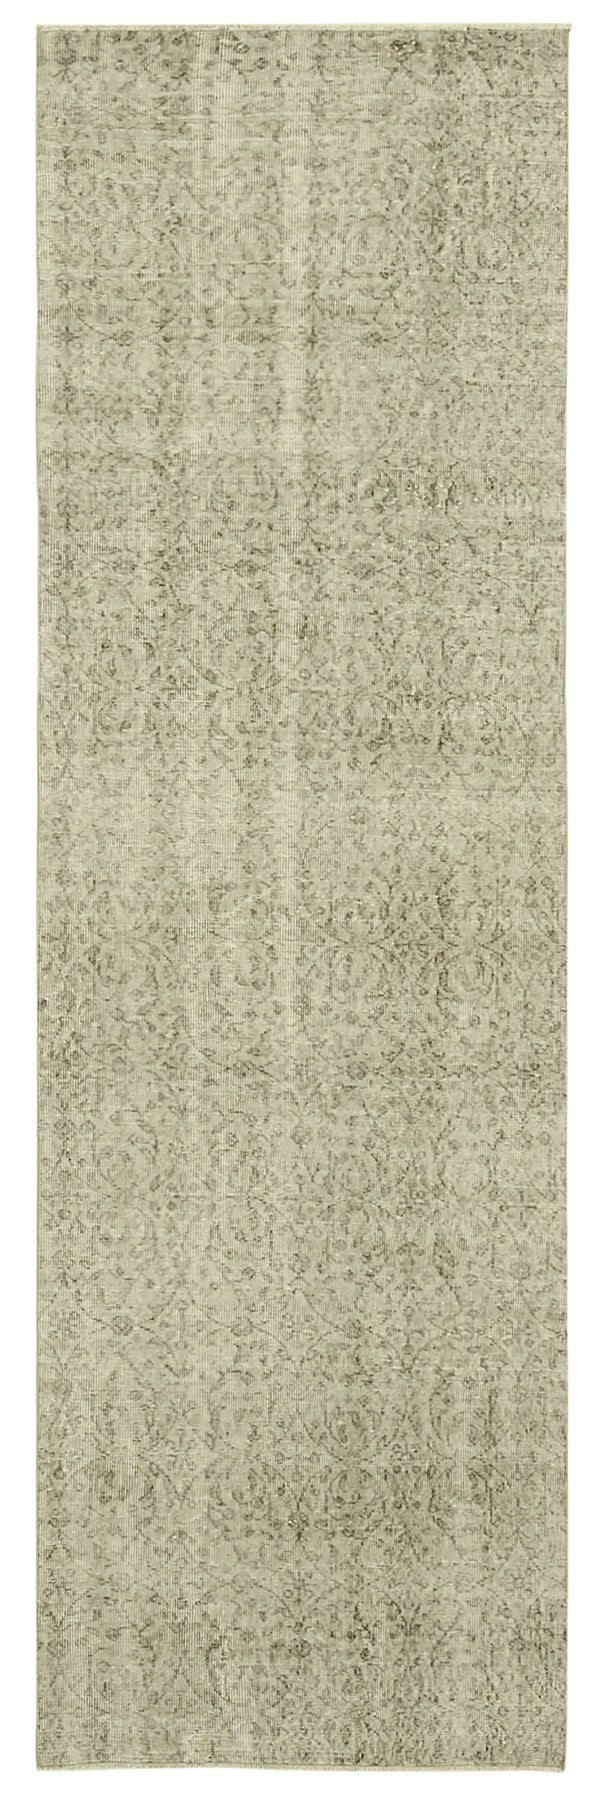 Handmade Overdyed Runner > Design# OL-AC-38205 > Size: 2'-11" x 9'-9", Carpet Culture Rugs, Handmade Rugs, NYC Rugs, New Rugs, Shop Rugs, Rug Store, Outlet Rugs, SoHo Rugs, Rugs in USA